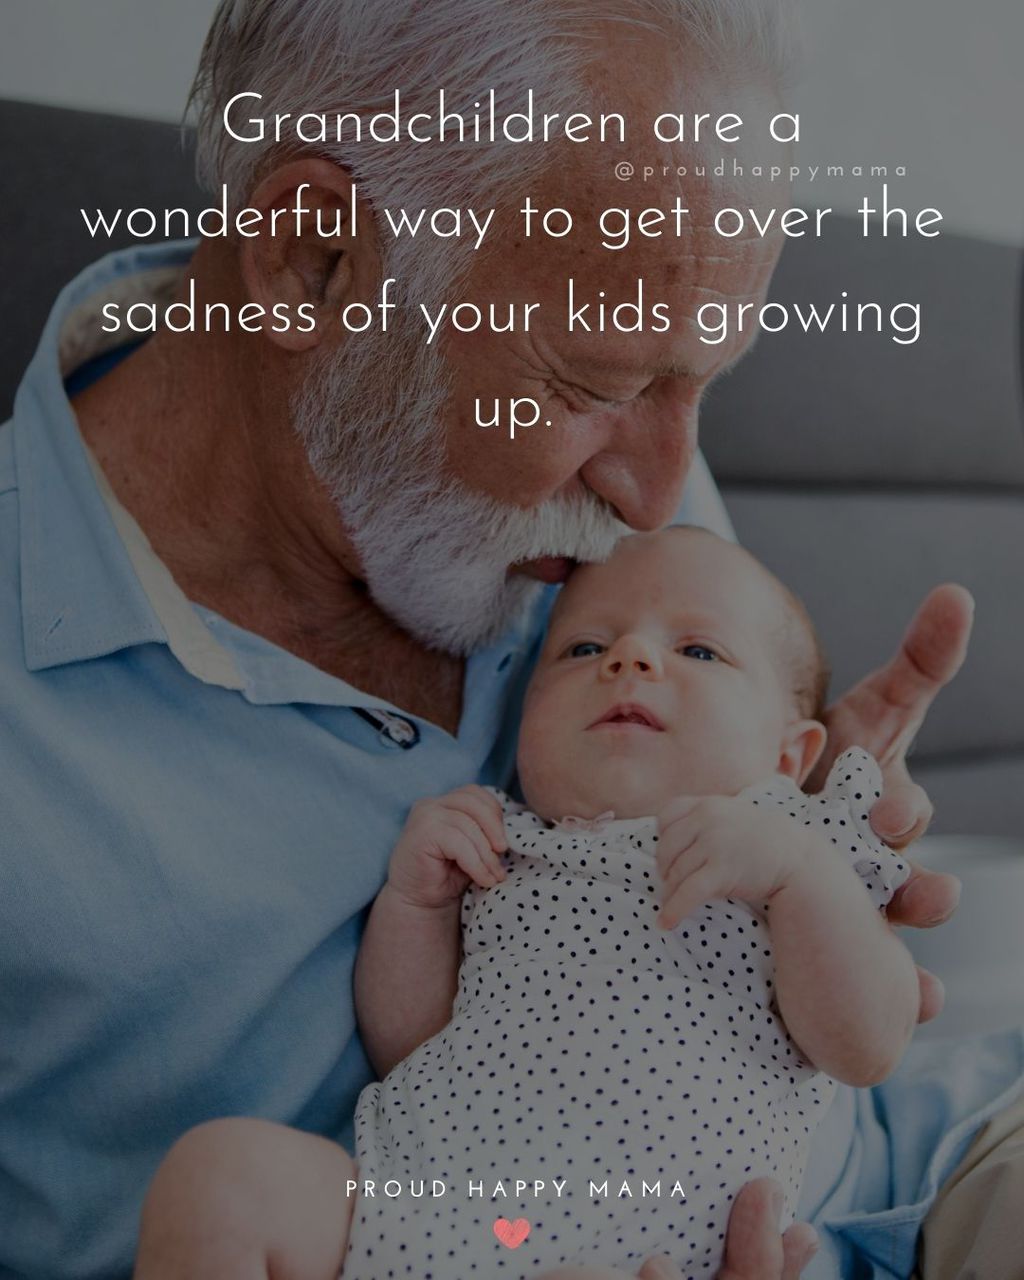 Quotes for Grandchildren - Grandchildren are a wonderful way to get over the sadness of your kids growing up.